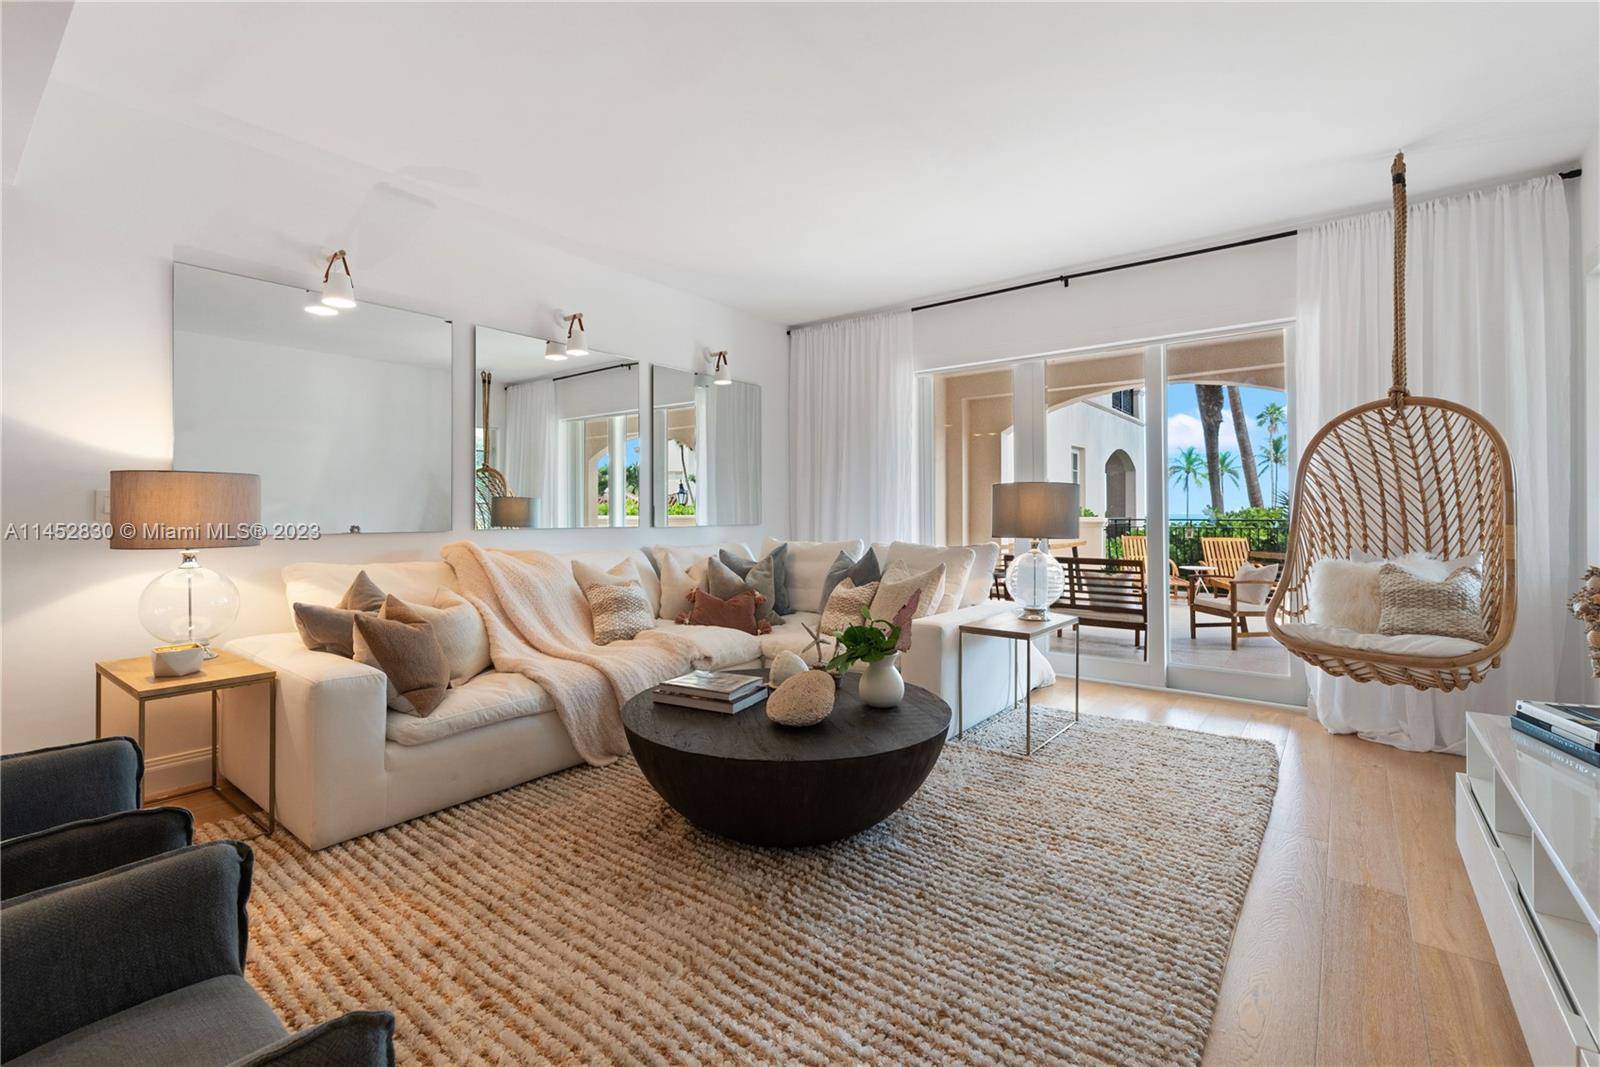 Fully Remodeled oasis within the heart of Fisher Island.